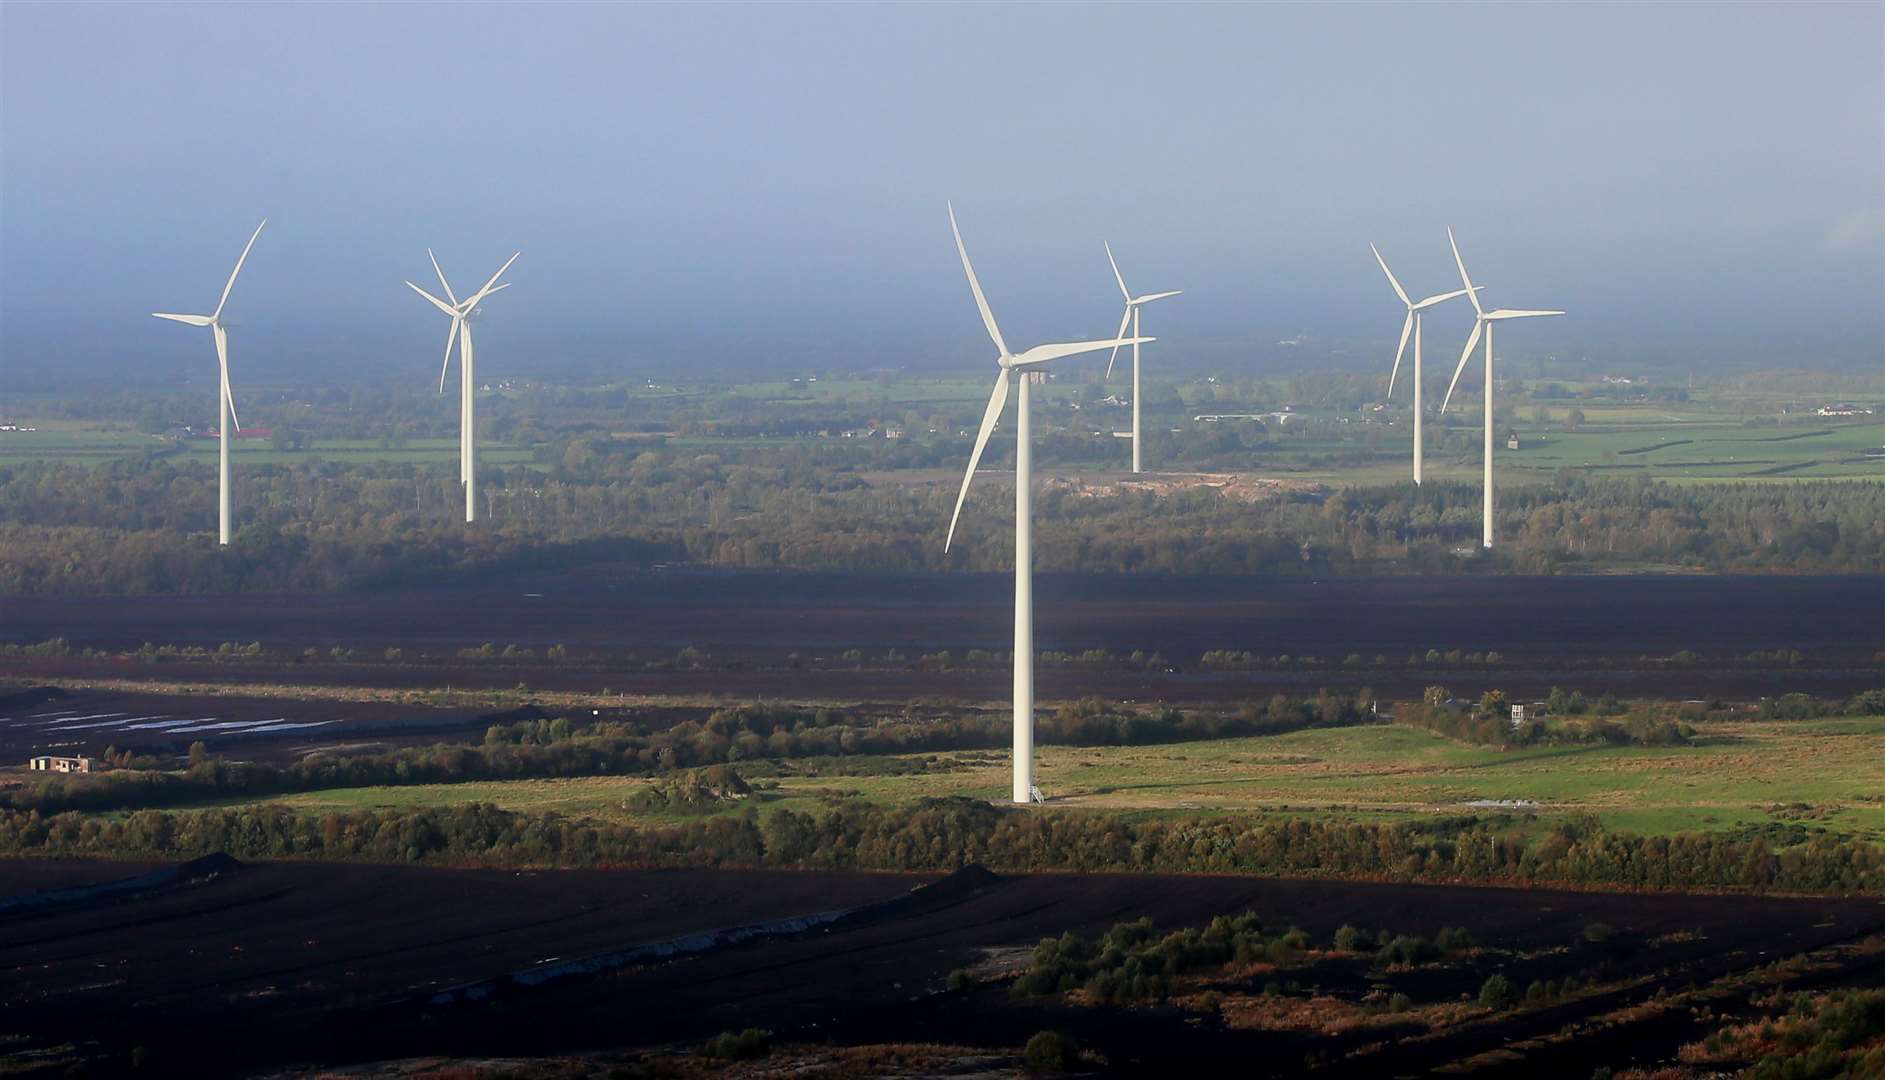 Reasons often cited for opposing onshore wind farms include noise (PA)